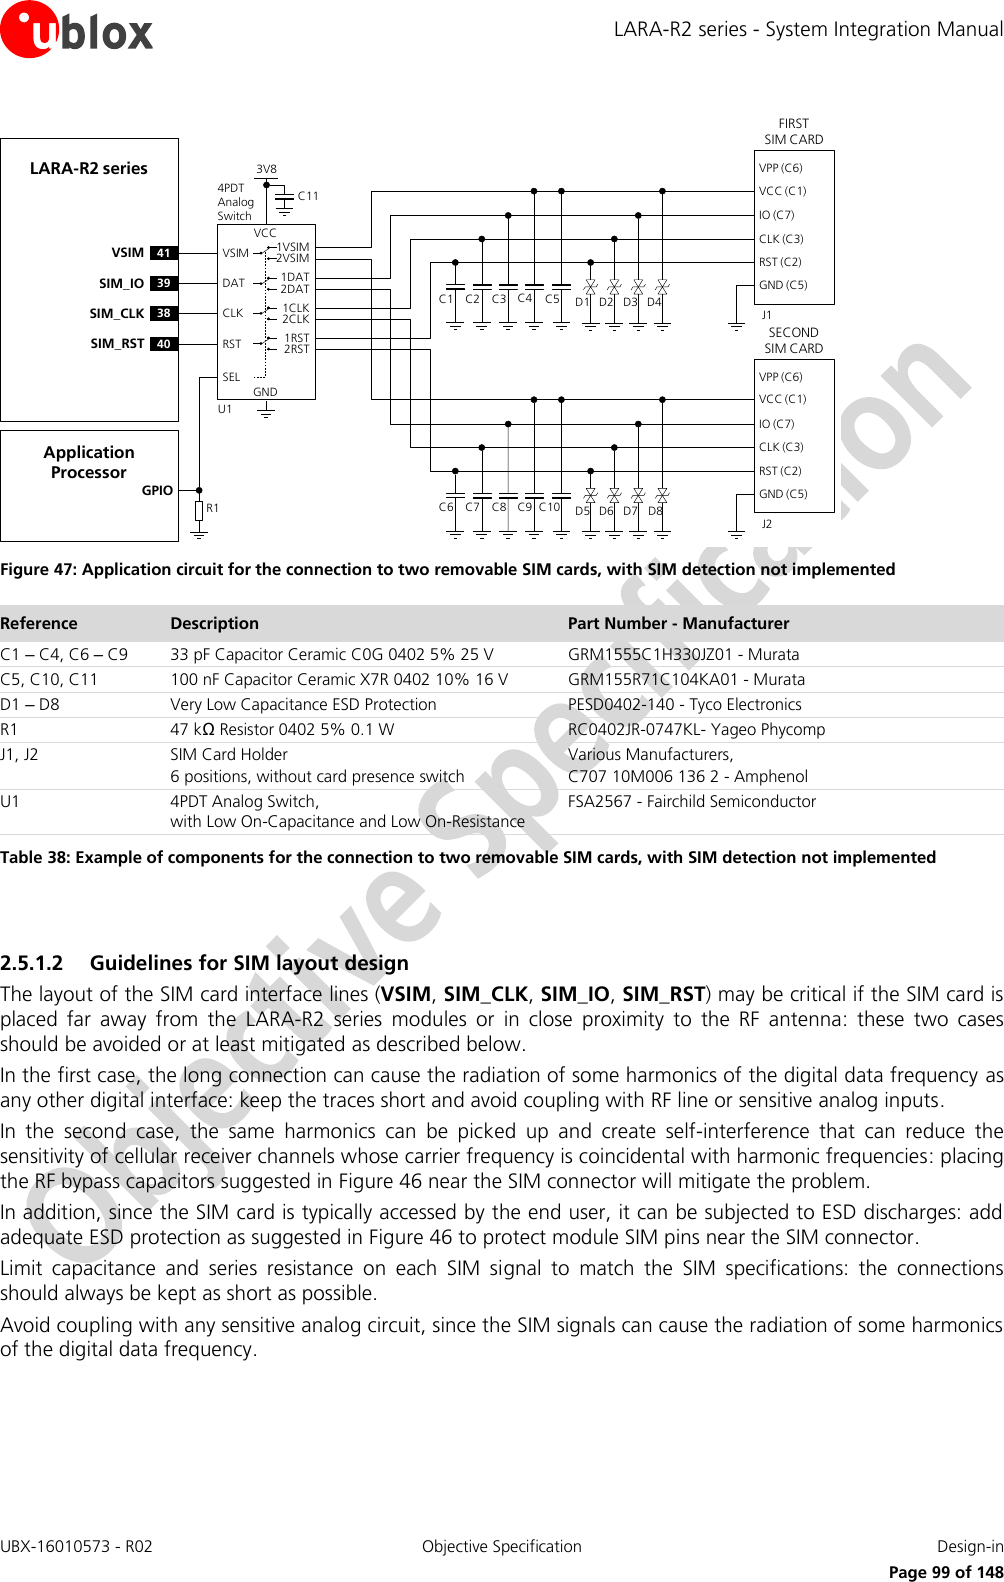 LARA-R2 series - System Integration Manual UBX-16010573 - R02  Objective Specification  Design-in     Page 99 of 148 LARA-R2 seriesC1FIRST             SIM CARDVPP (C6)VCC (C1)IO (C7)CLK (C3)RST (C2)GND (C5)C2 C3 C5J1C4 D1 D2 D3 D4GNDU141VSIM VSIM 1VSIM2VSIMVCCC114PDT Analog Switch3V839SIM_IO DAT 1DAT2DAT38SIM_CLK CLK 1CLK2CLK40SIM_RST RST 1RST2RSTSELSECOND   SIM CARDVPP (C6)VCC (C1)IO (C7)CLK (C3)RST (C2)GND (C5)J2C6 C7 C8 C10C9 D5 D6 D7 D8Application ProcessorGPIOR1 Figure 47: Application circuit for the connection to two removable SIM cards, with SIM detection not implemented Reference Description Part Number - Manufacturer C1 – C4, C6 – C9 33 pF Capacitor Ceramic C0G 0402 5% 25 V GRM1555C1H330JZ01 - Murata C5, C10, C11 100 nF Capacitor Ceramic X7R 0402 10% 16 V GRM155R71C104KA01 - Murata D1 – D8 Very Low Capacitance ESD Protection PESD0402-140 - Tyco Electronics  R1 47 kΩ Resistor 0402 5% 0.1 W RC0402JR-0747KL- Yageo Phycomp J1, J2 SIM Card Holder 6 positions, without card presence switch Various Manufacturers, C707 10M006 136 2 - Amphenol U1 4PDT Analog Switch,  with Low On-Capacitance and Low On-Resistance FSA2567 - Fairchild Semiconductor Table 38: Example of components for the connection to two removable SIM cards, with SIM detection not implemented   2.5.1.2 Guidelines for SIM layout design The layout of the SIM card interface lines (VSIM, SIM_CLK, SIM_IO, SIM_RST) may be critical if the SIM card is placed  far  away  from  the  LARA-R2  series  modules  or  in  close  proximity  to  the  RF  antenna:  these  two  cases should be avoided or at least mitigated as described below.  In the first case, the long connection can cause the radiation of some harmonics of the digital data frequency as any other digital interface: keep the traces short and avoid coupling with RF line or sensitive analog inputs. In  the  second  case,  the  same  harmonics  can  be  picked  up  and  create  self-interference  that  can  reduce  the sensitivity of cellular receiver channels whose carrier frequency is coincidental with harmonic frequencies: placing the RF bypass capacitors suggested in Figure 46 near the SIM connector will mitigate the problem. In addition, since the SIM card is typically accessed by the end user, it can be subjected to ESD discharges: add adequate ESD protection as suggested in Figure 46 to protect module SIM pins near the SIM connector. Limit  capacitance  and  series  resistance  on  each  SIM  signal  to  match  the  SIM  specifications:  the  connections should always be kept as short as possible. Avoid coupling with any sensitive analog circuit, since the SIM signals can cause the radiation of some harmonics of the digital data frequency.  